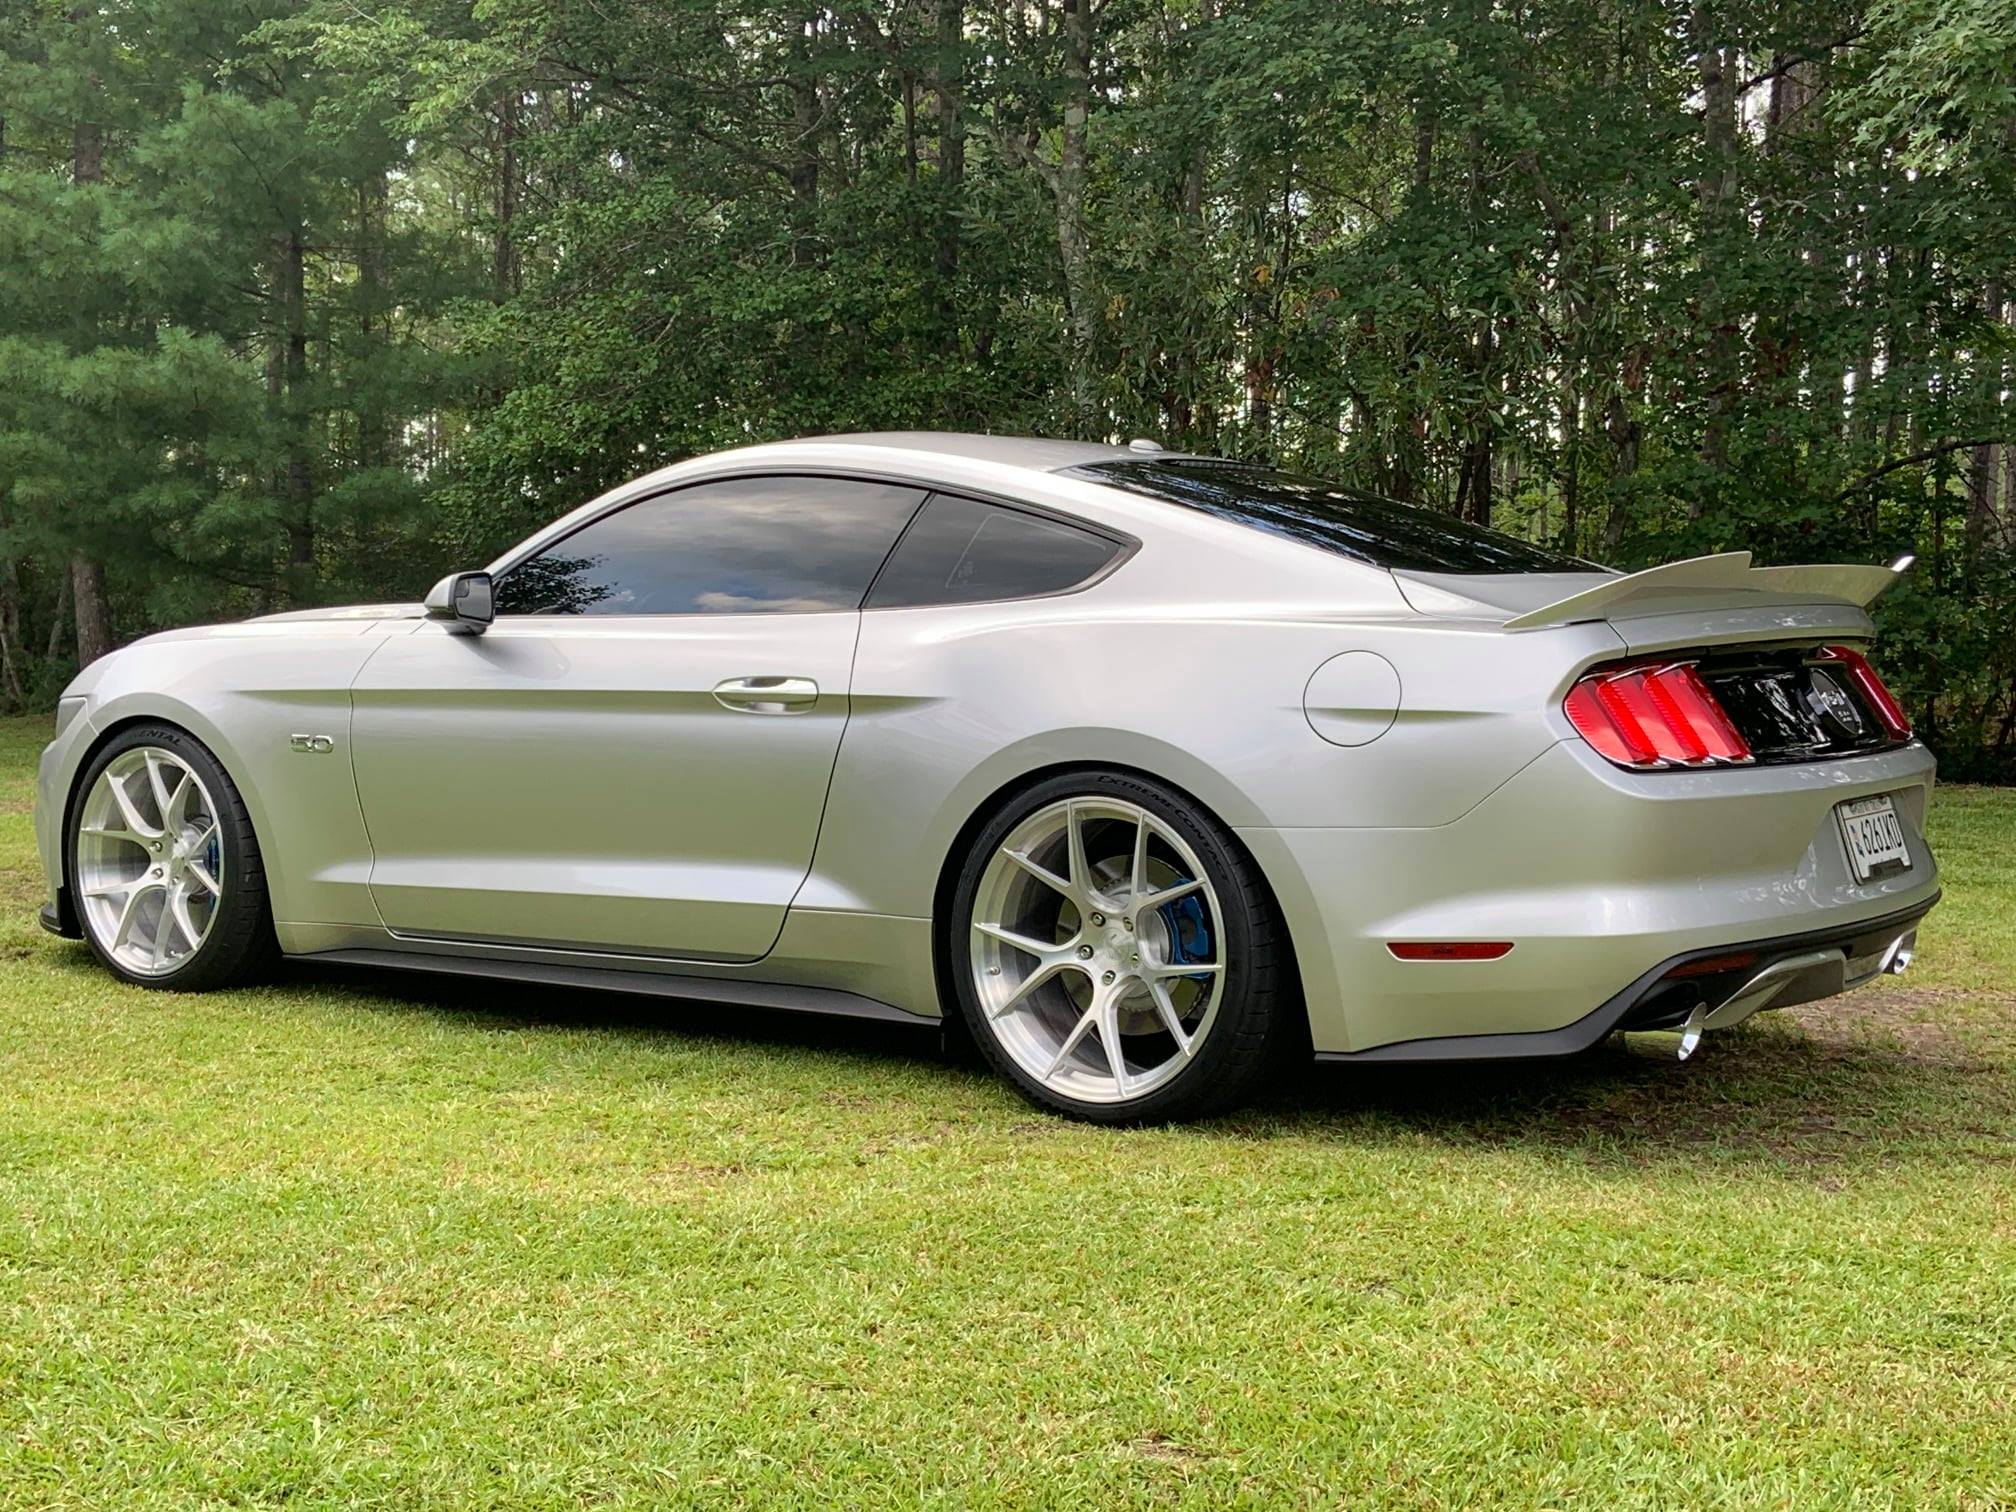 ford-mustang-gt-with-20x10-vs-forged-vs02-aftermarket-wheels-4.jpg